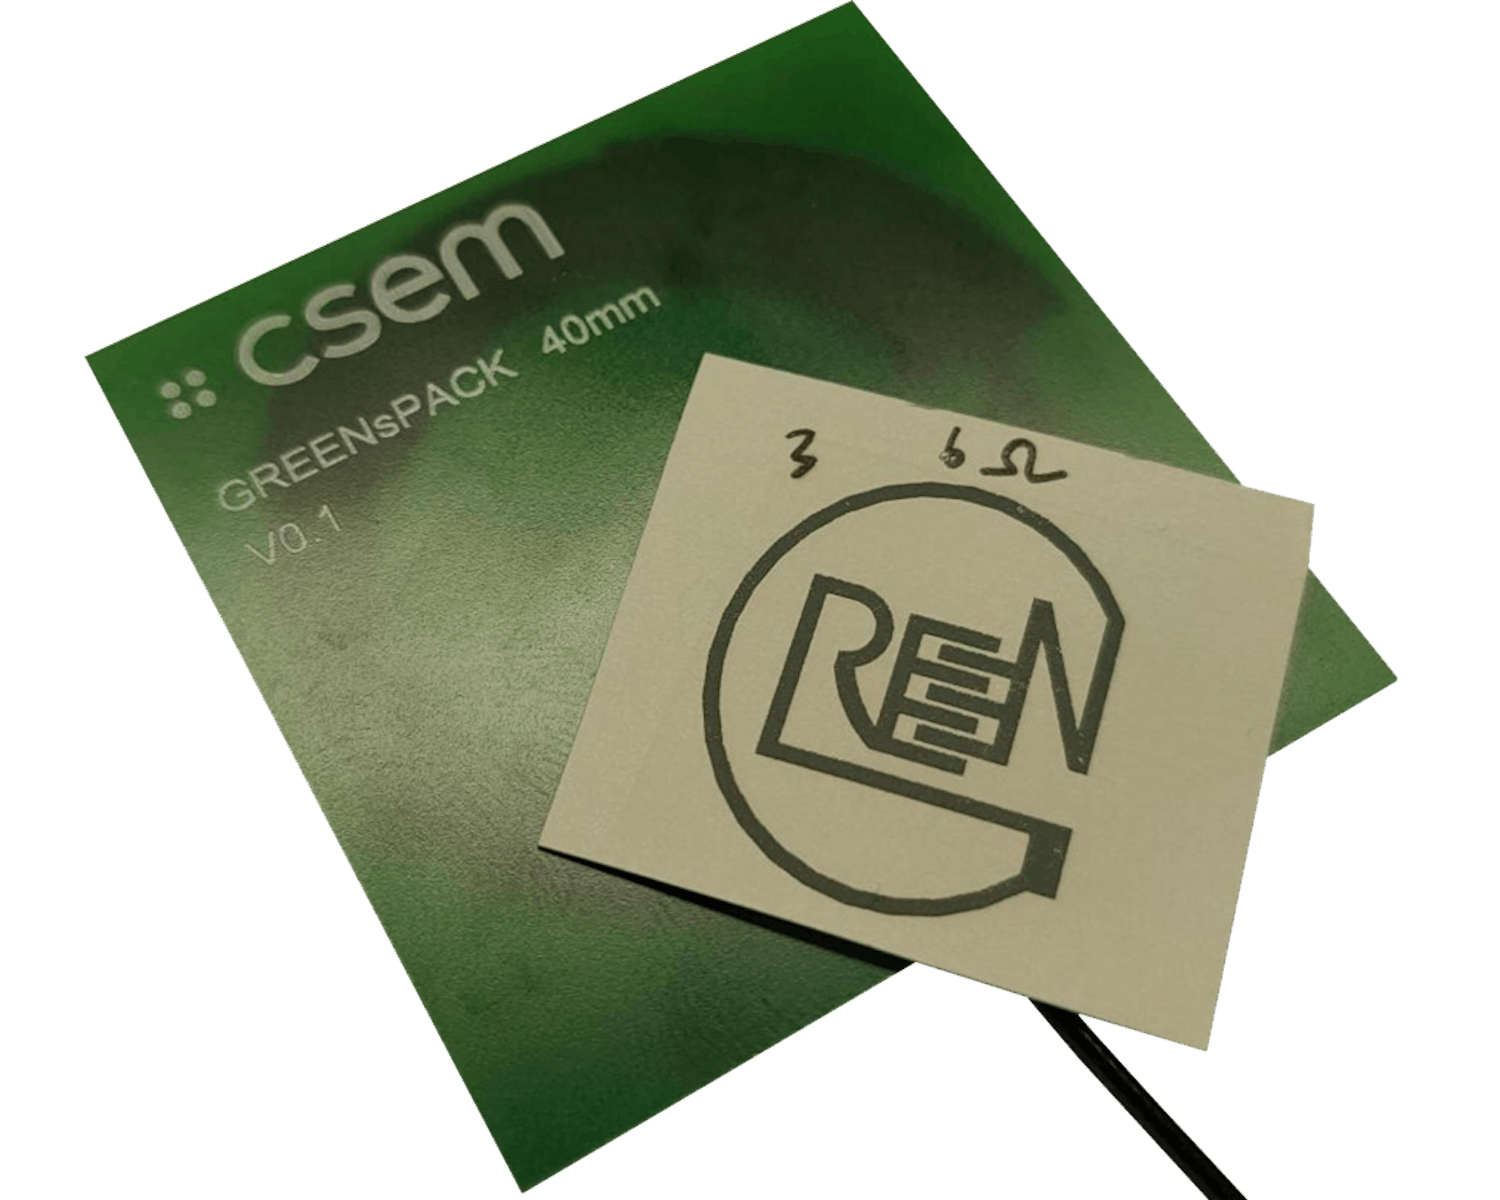 Fully biodegradable passive RF tag